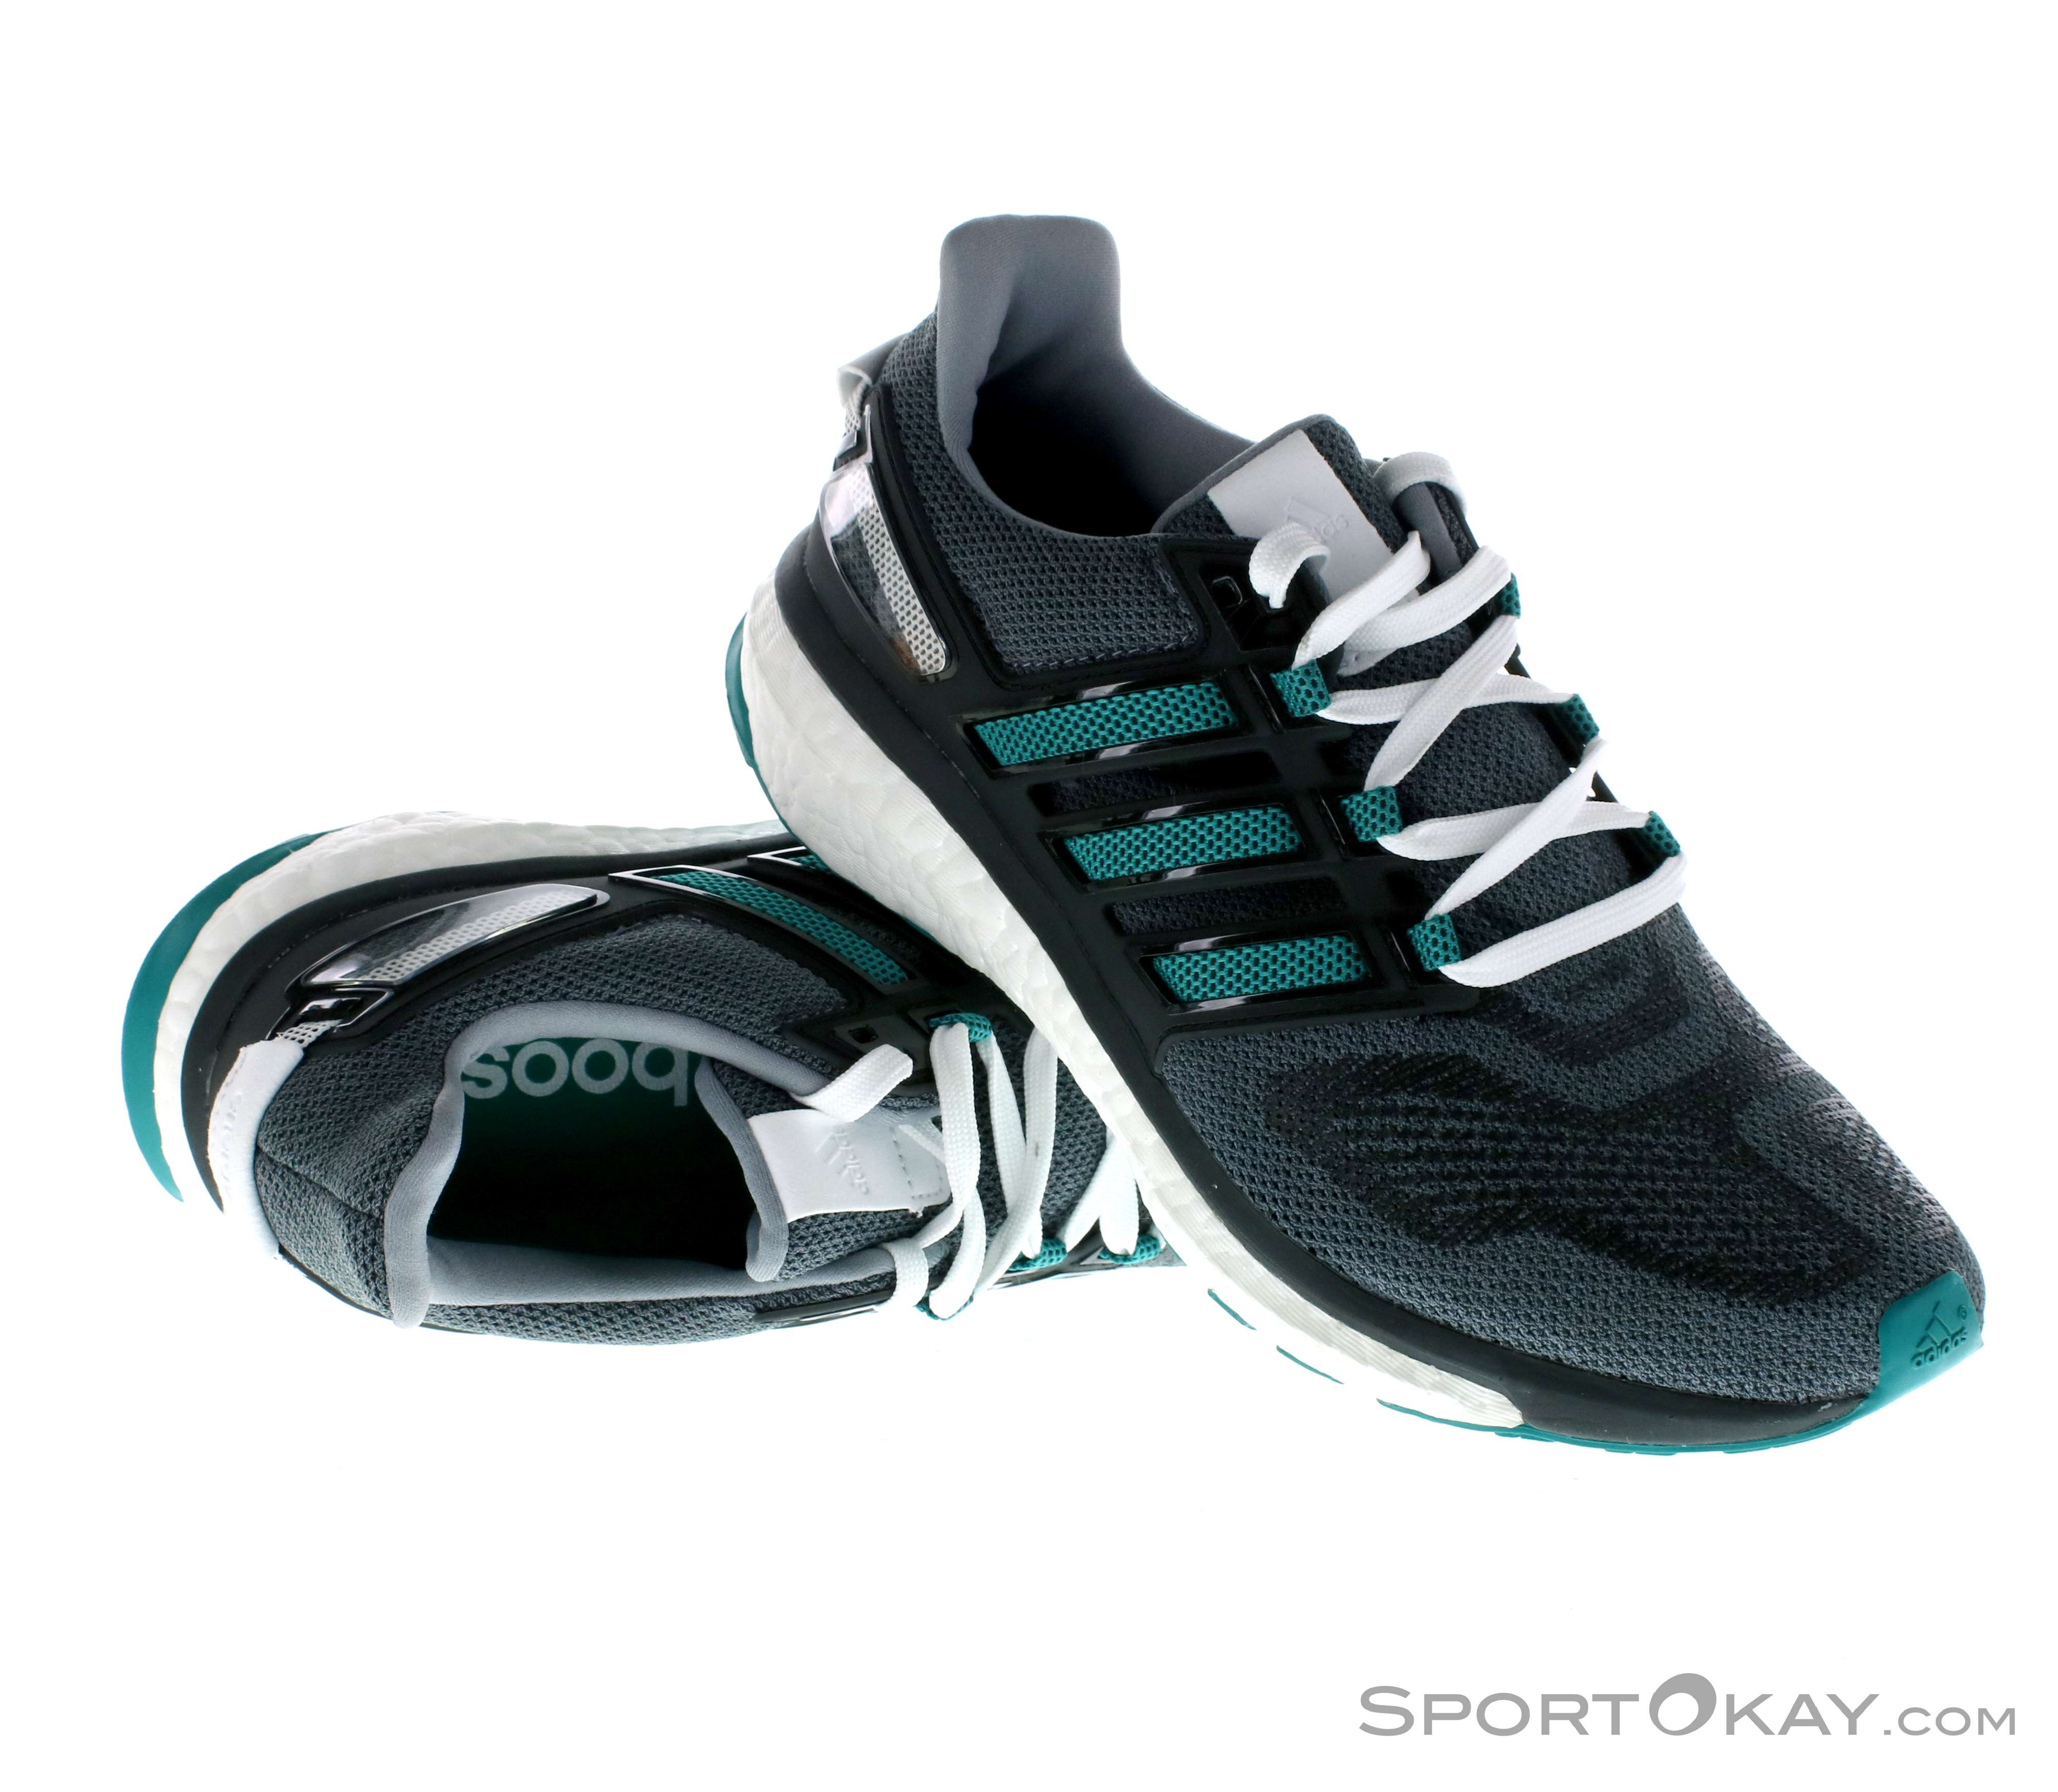 adidas energy boost men's running shoes